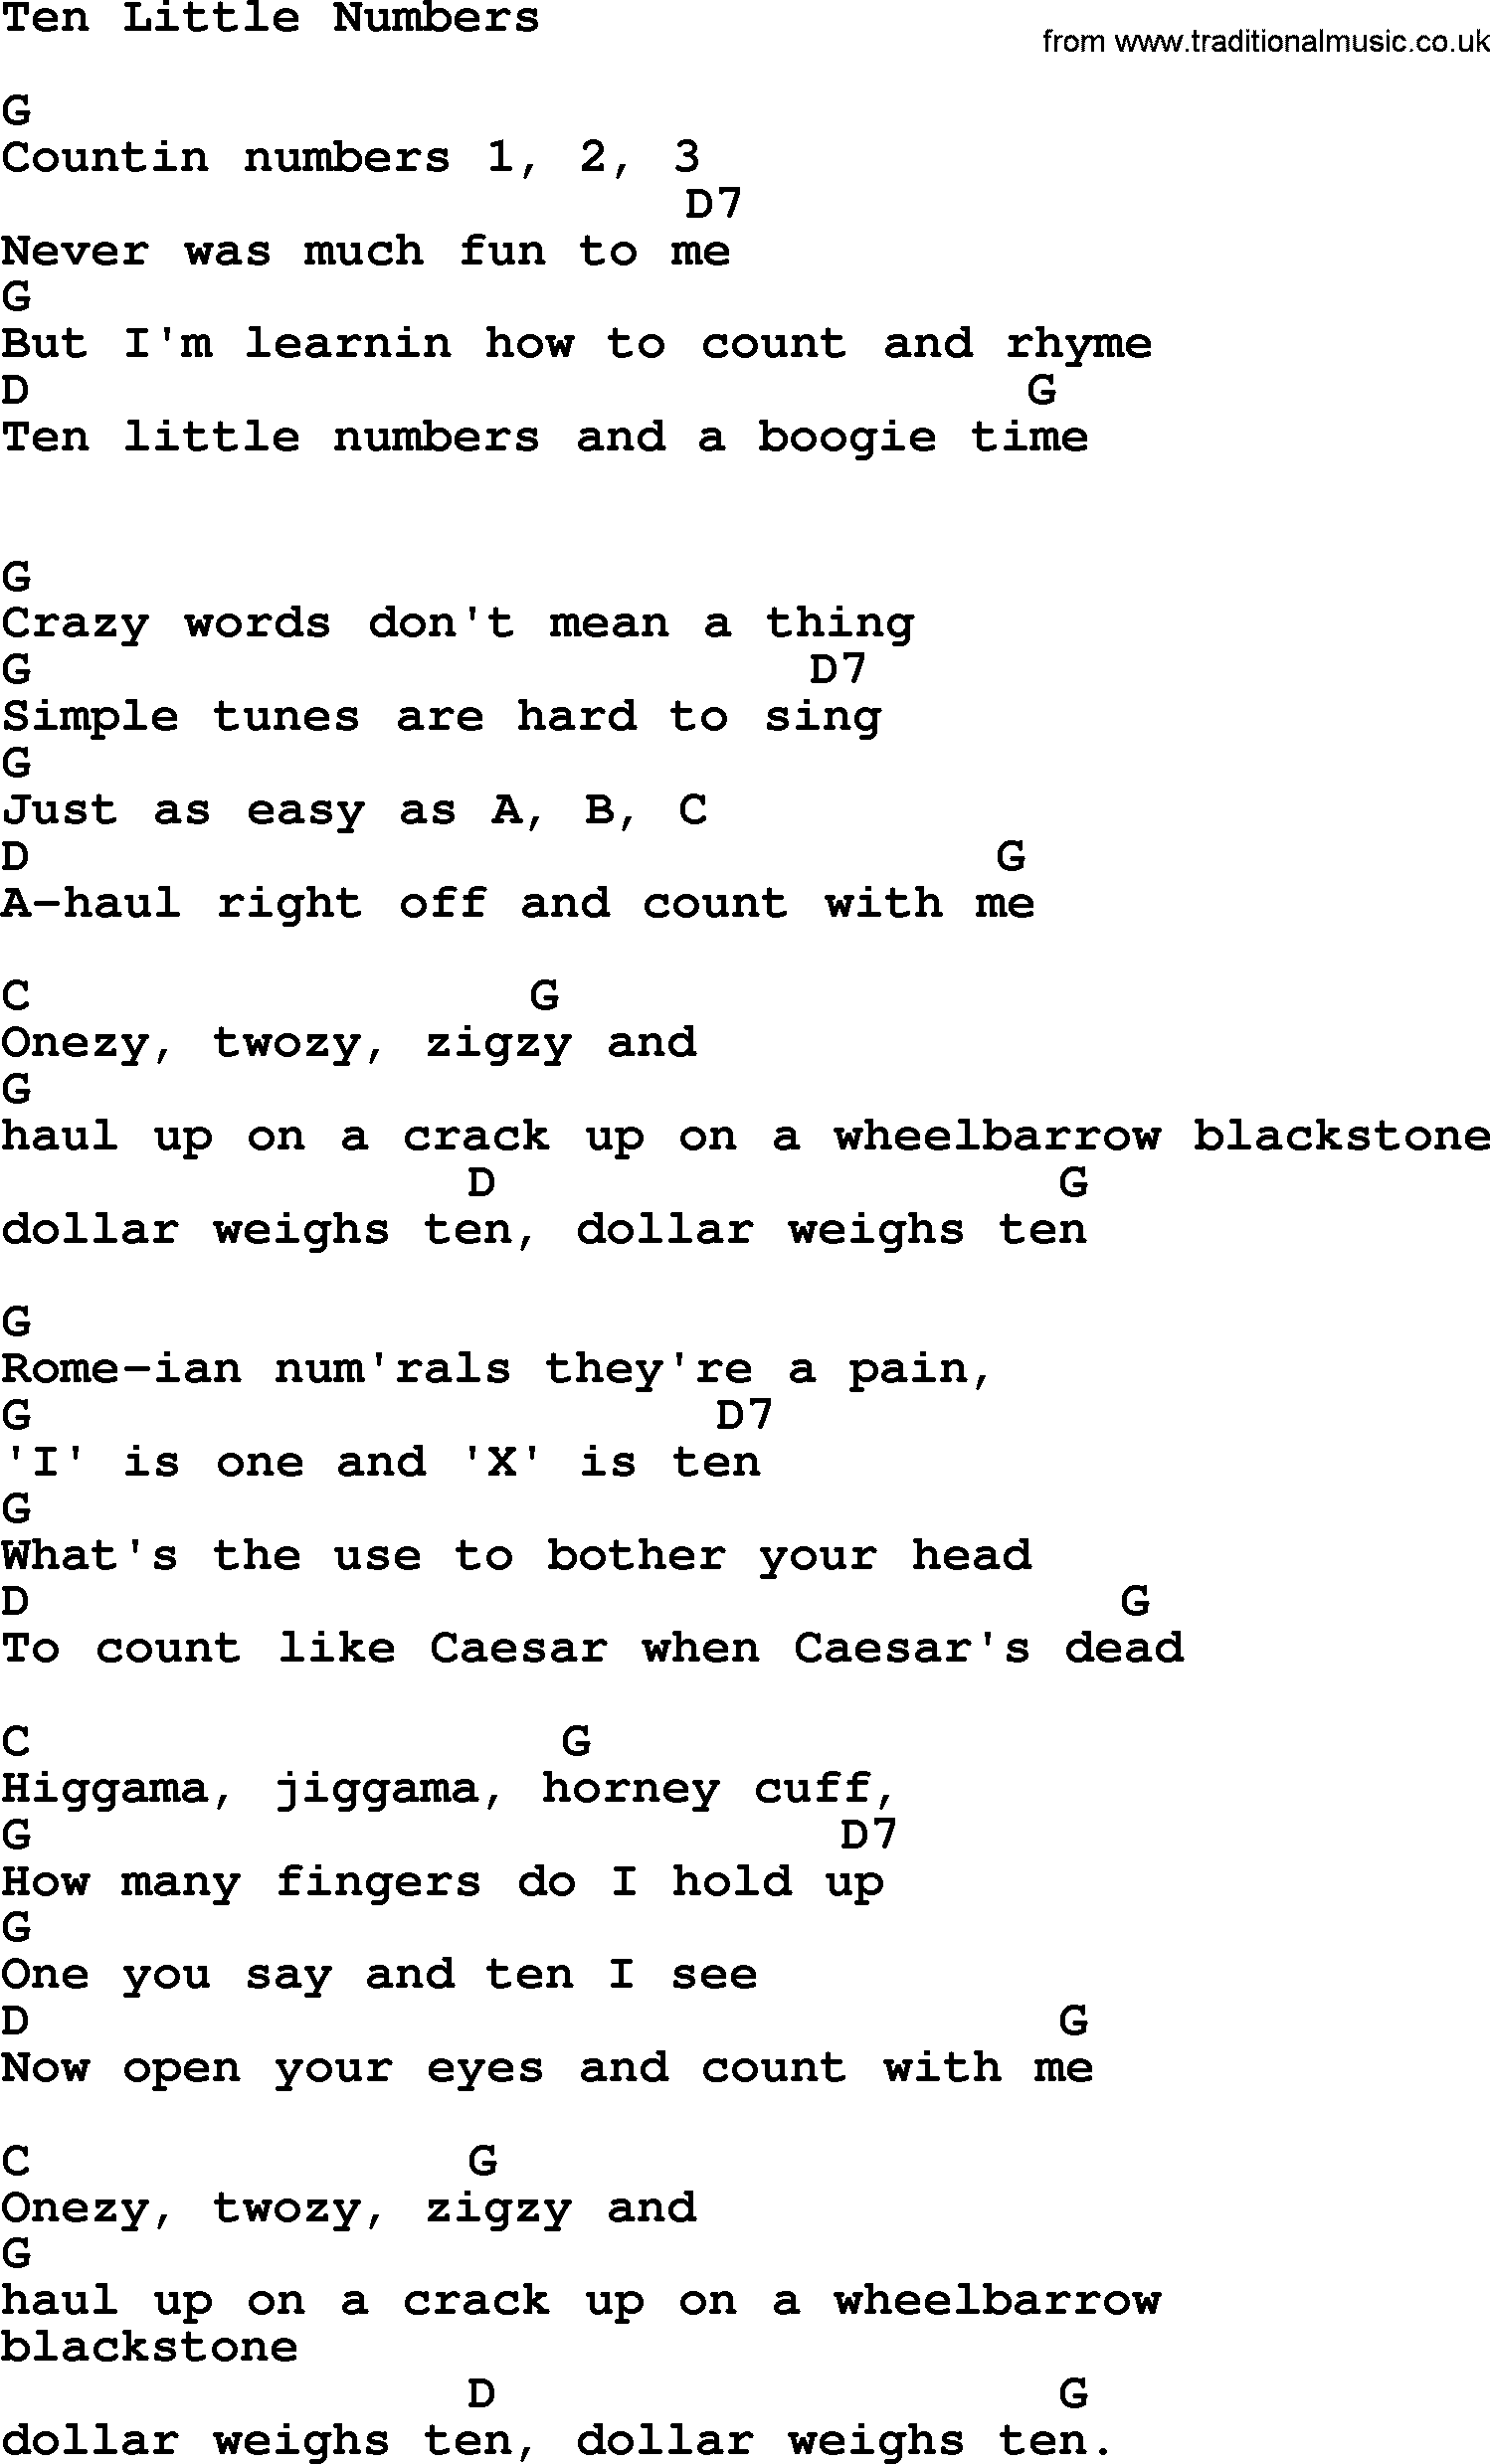 Hank Williams song Ten Little Numbers, lyrics and chords